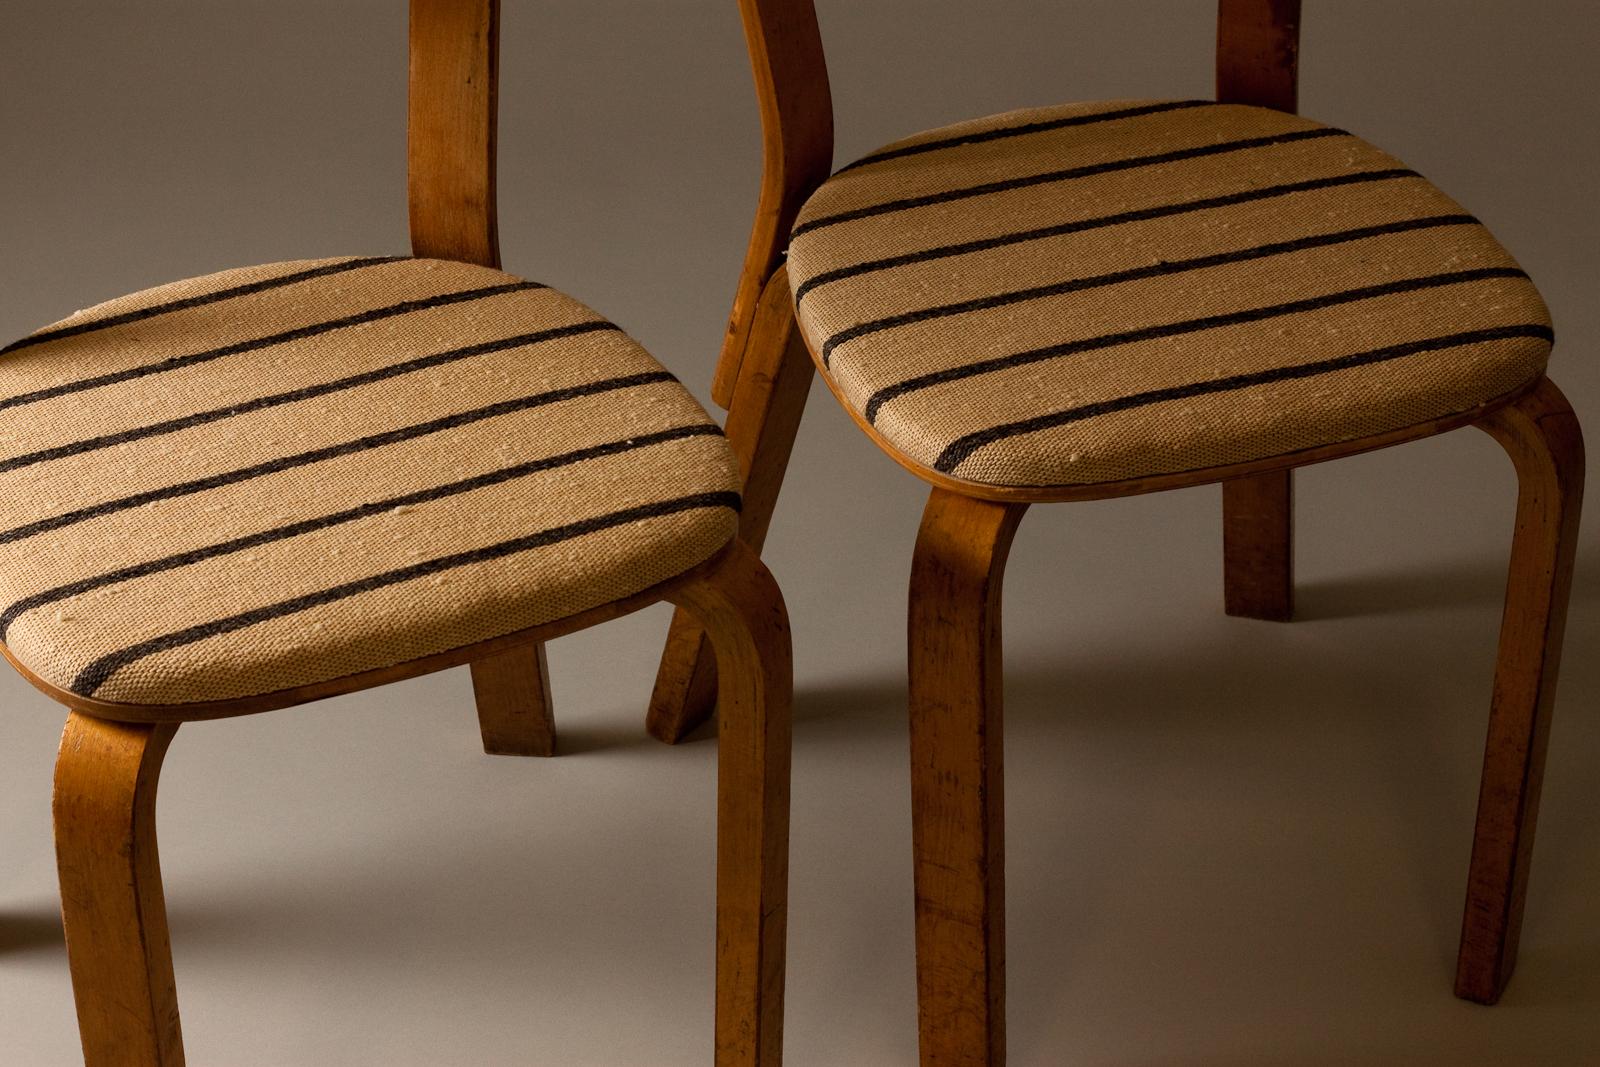 Rare pair of Alvar Aalto 1930s special sandwich upholstery. These are collectors items. The chairs are reupholsteres in vintage 1930s artek fabric.